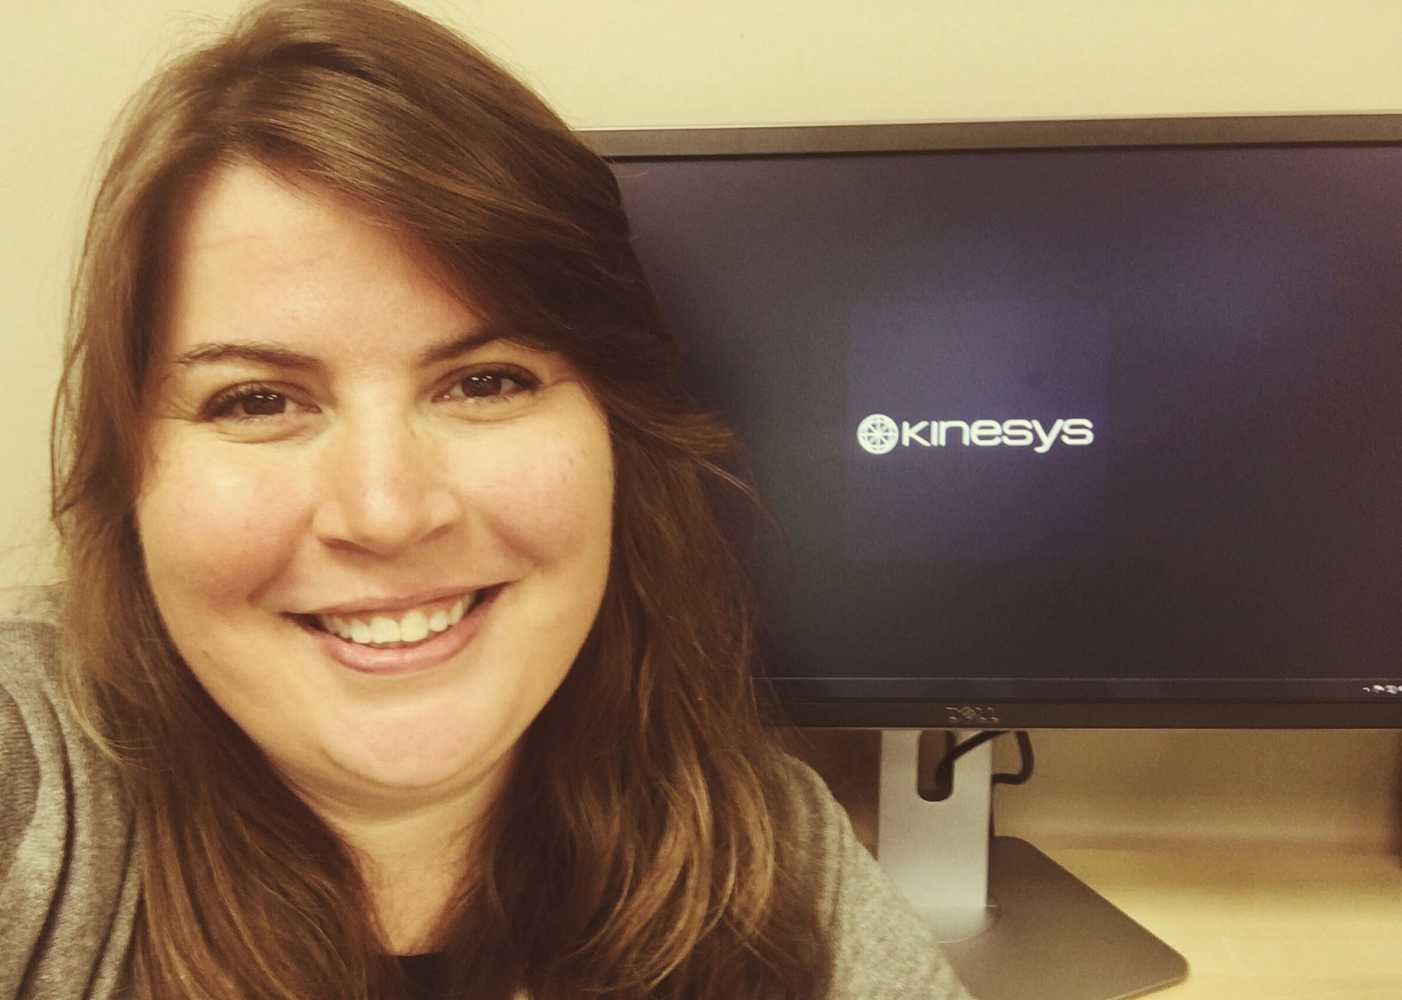 Tracey Anderson is based in Kinesys USA’s Atlanta, Georgia HQ